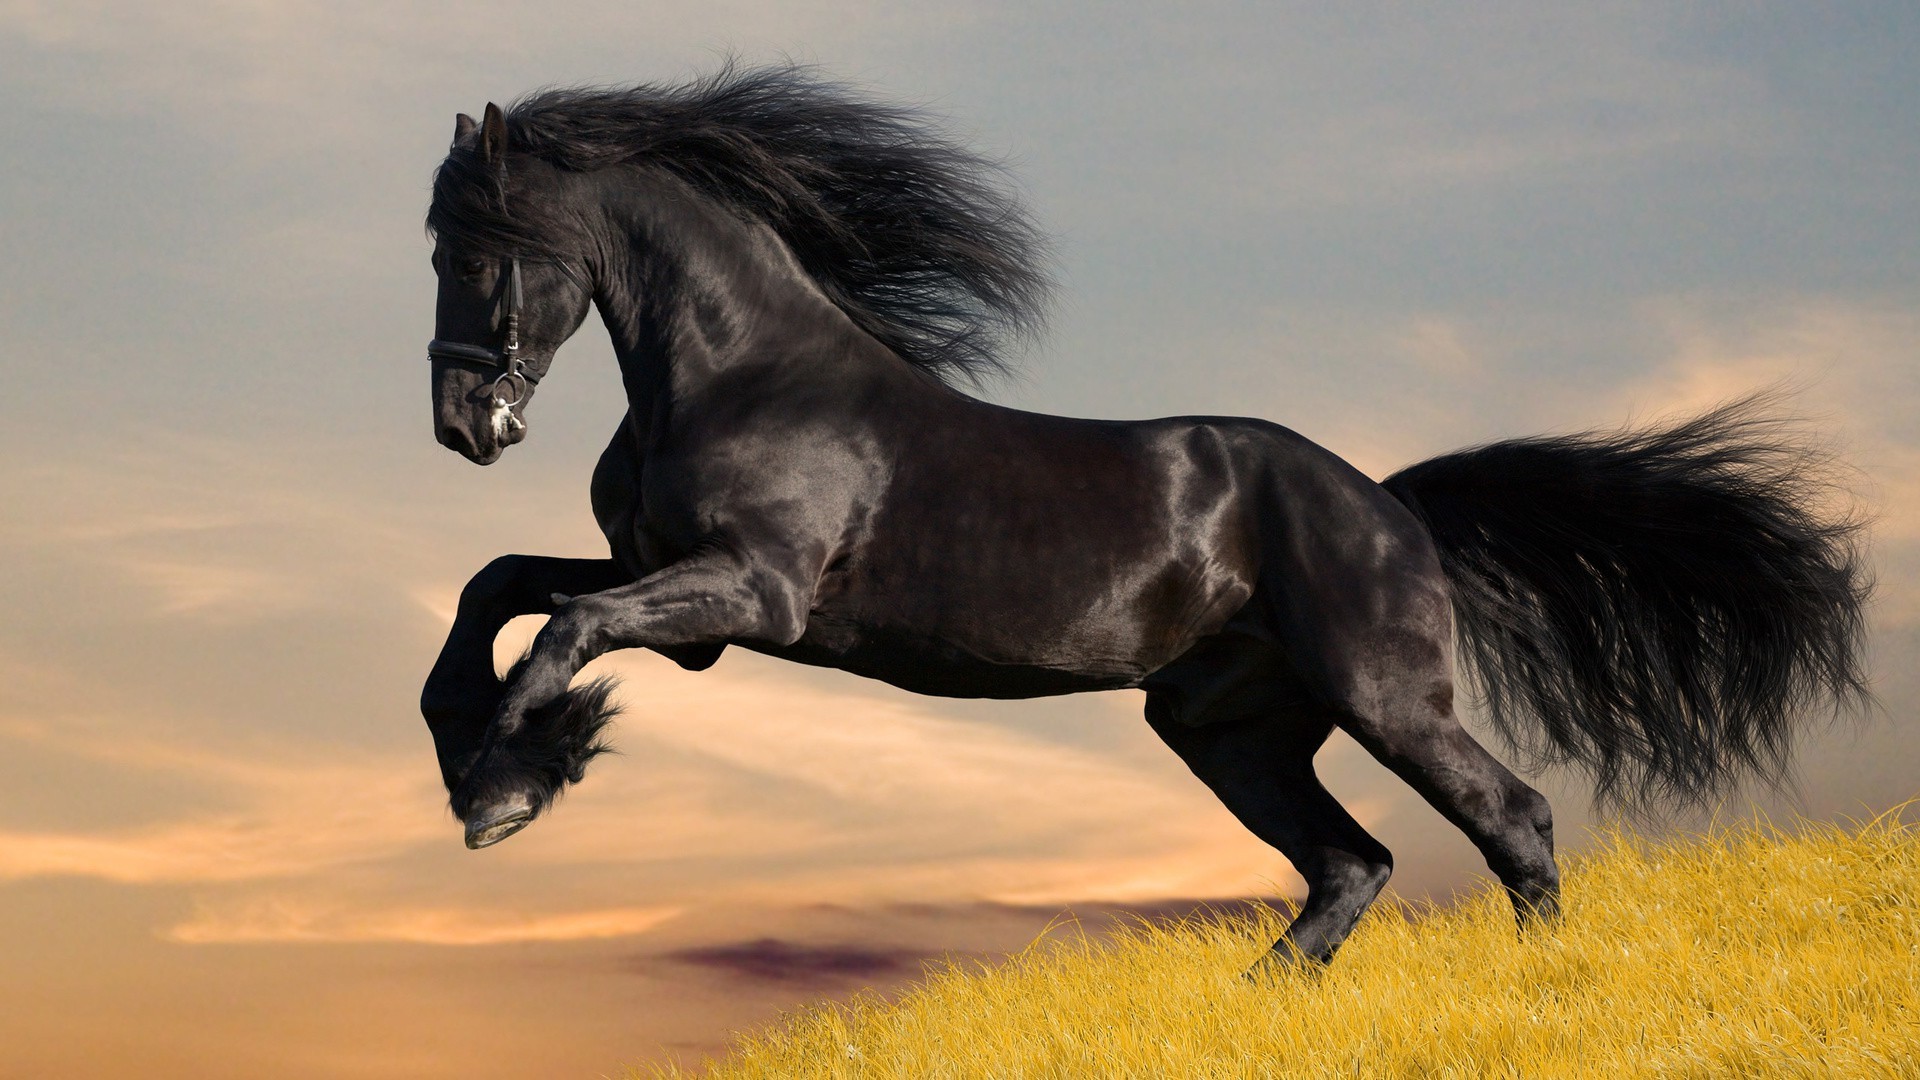 Beautiful Black Horses Pictures Best Of Free Hd Wallpapers Horse Images  Background, Picture Of A Black Stallion Horse Background Image And Wallpaper  for Free Download